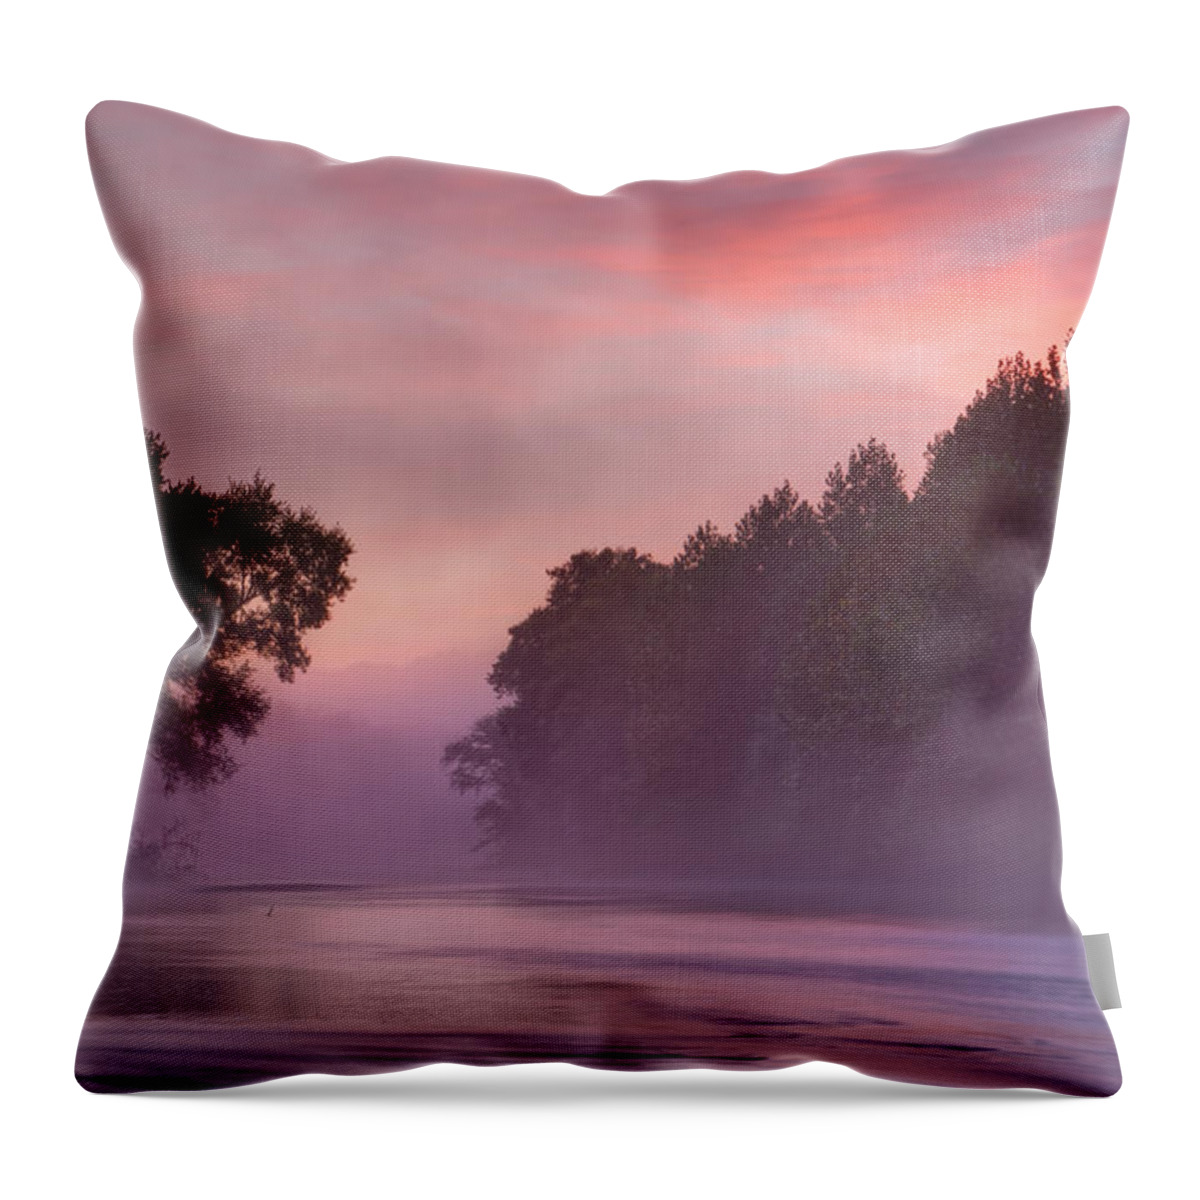 2015 Throw Pillow featuring the photograph Morning Mist by Robert Charity